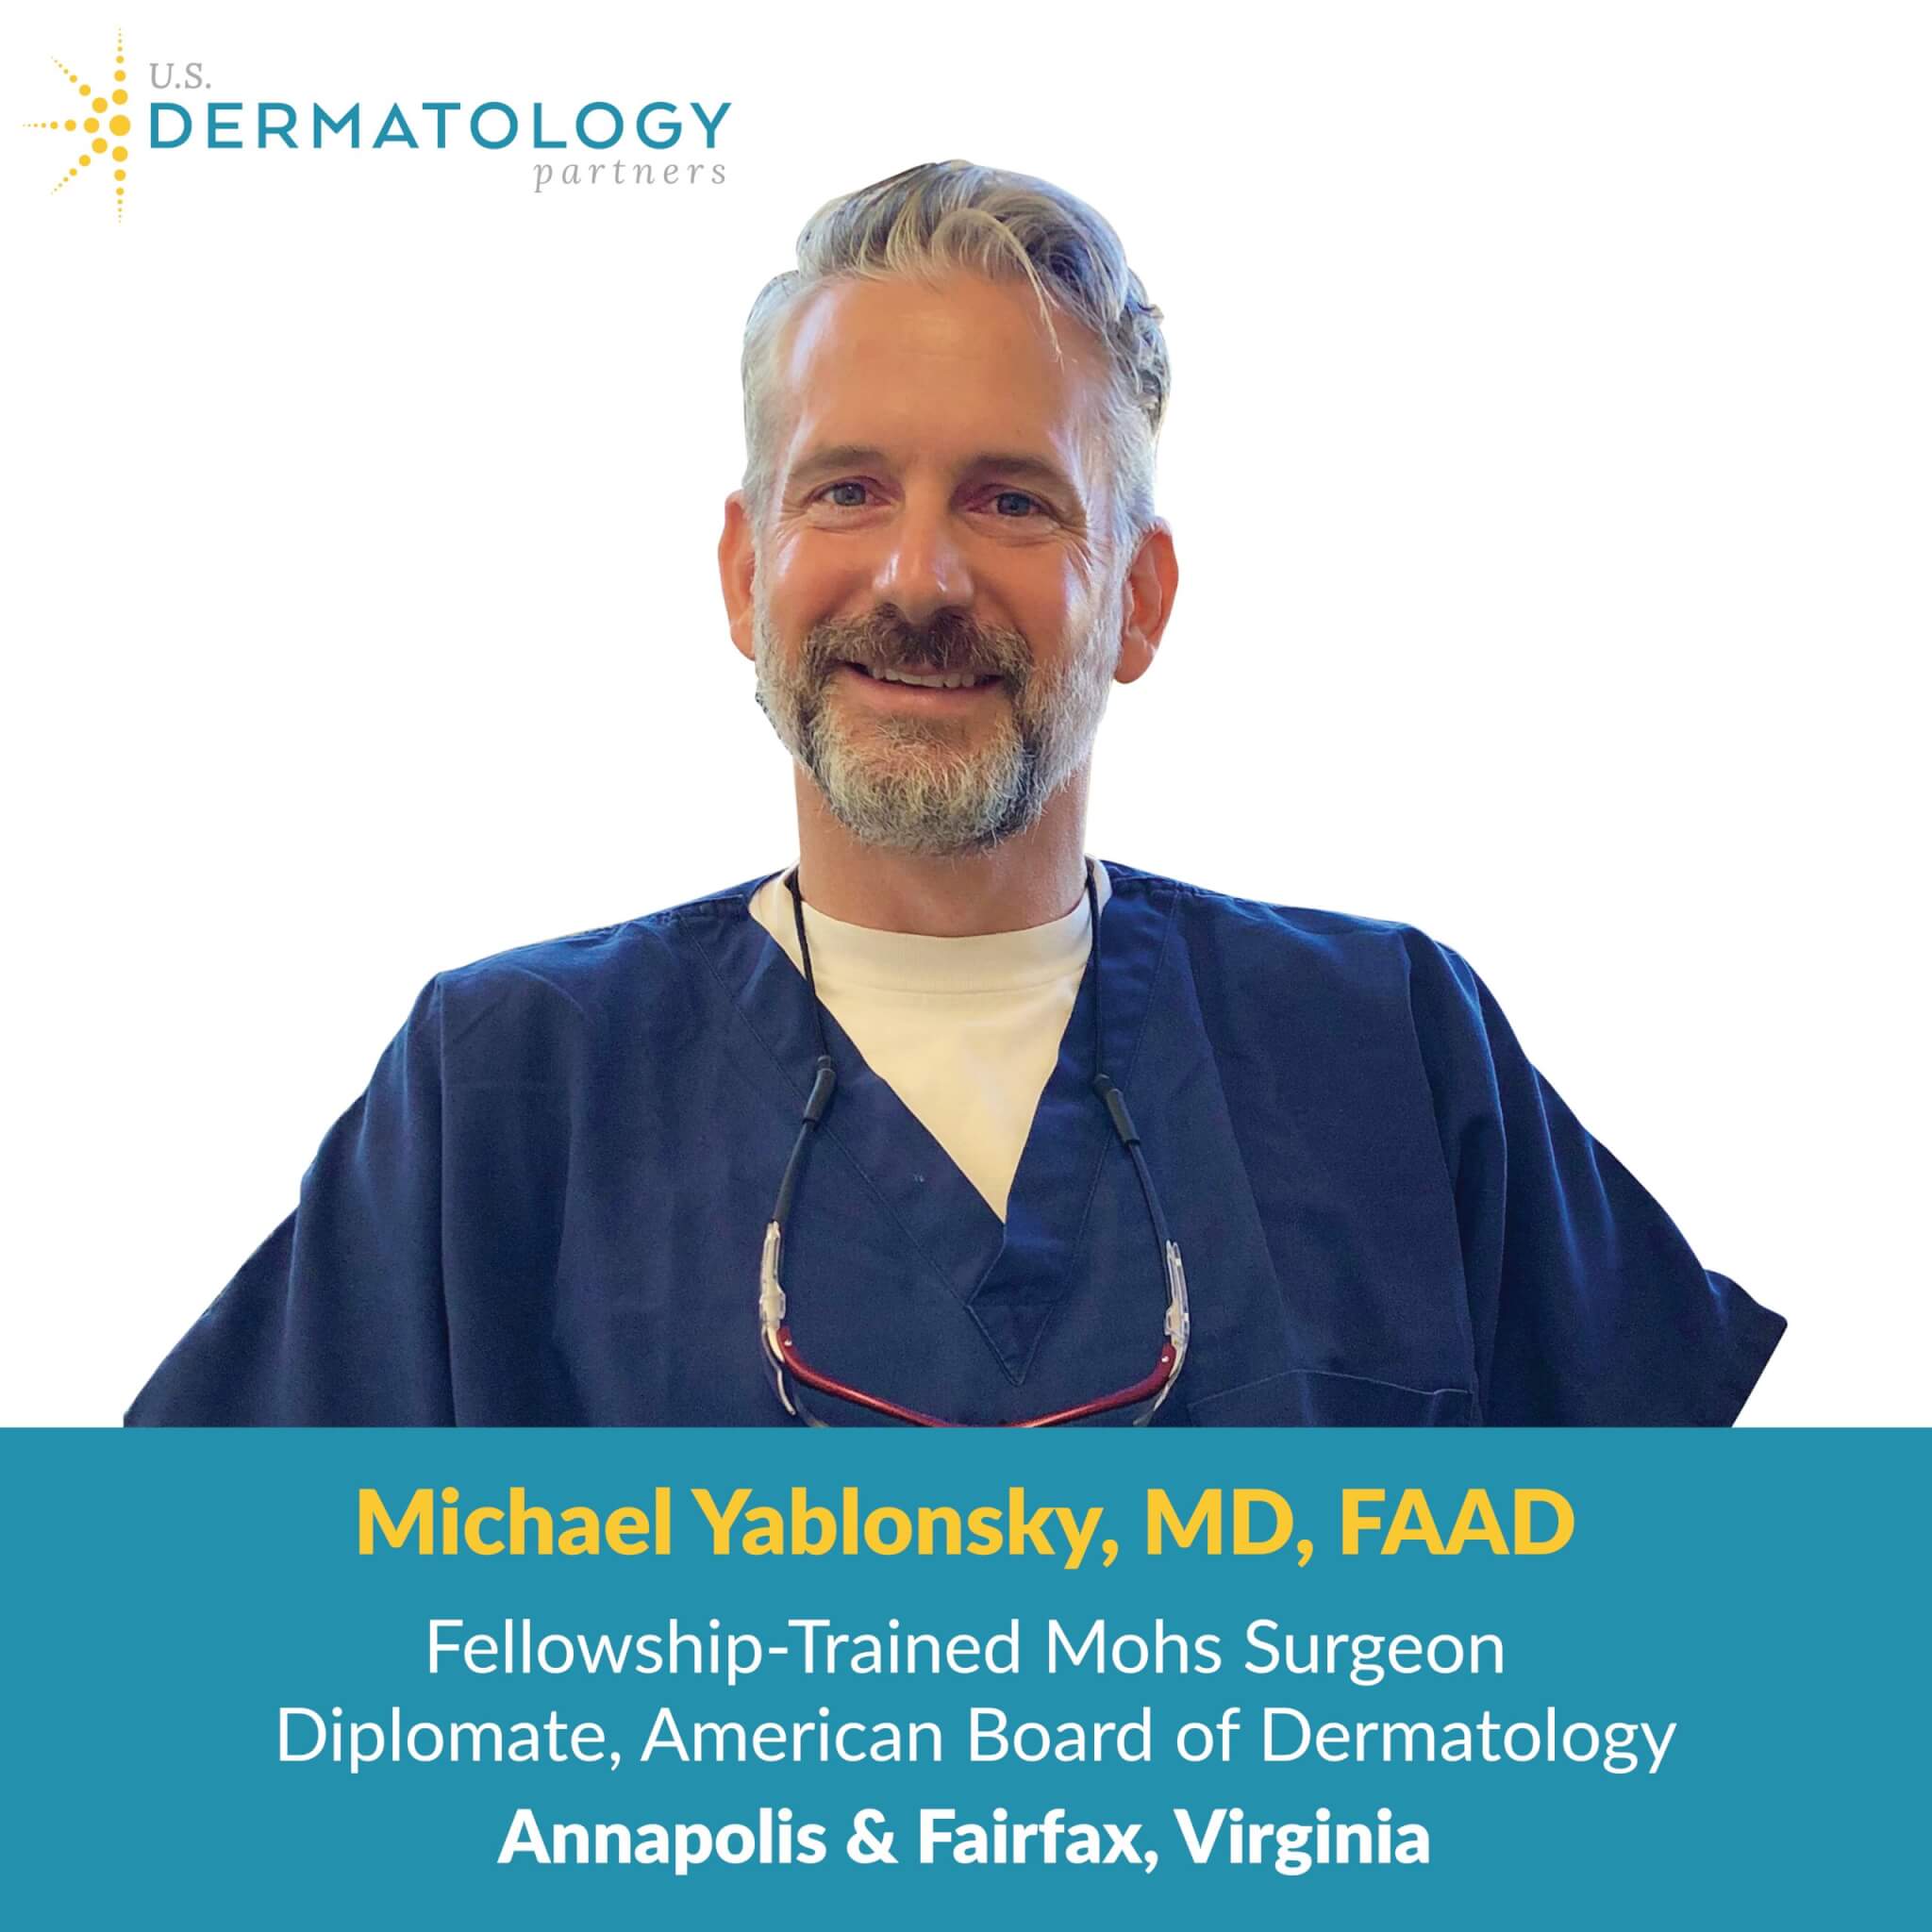 Annapolis, Maryland & Fairfax, Virginia - U.S. Dermatology Partners is pleased to welcome Mohs Surgeon, Michael Yablonsky, M.D., to their Annapolis, Maryland, Centreville, Virginia, and Fairfax, Virginia locations